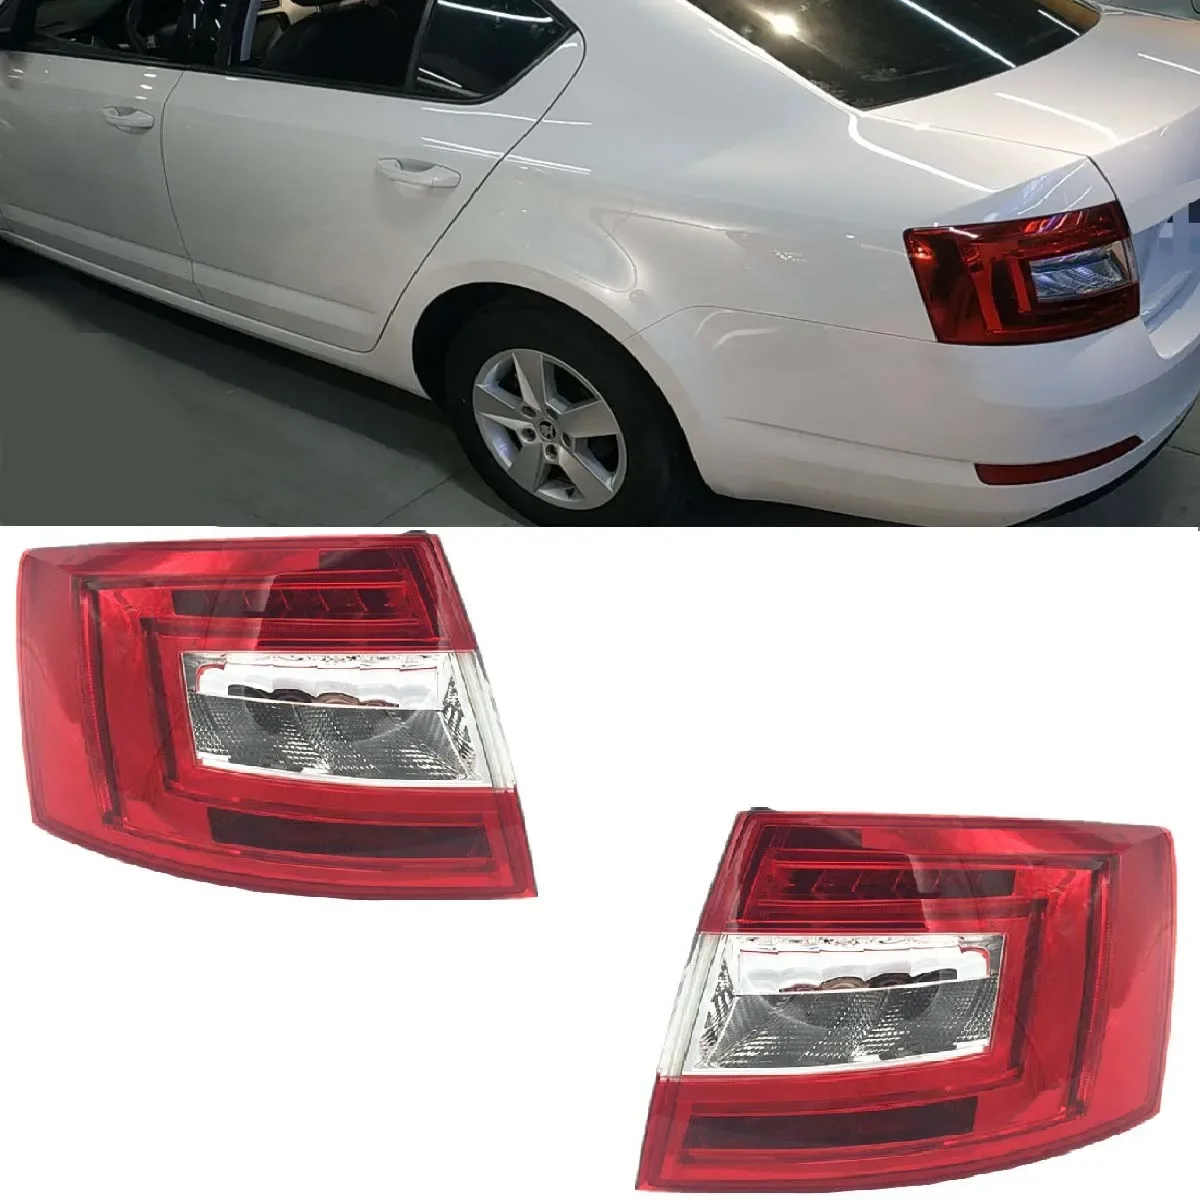 

Rear Stop Tail Light Brake Light for Skoda Octavia A7 Sedan 2015 2016 2017 Auto Parts Replacement and Modification